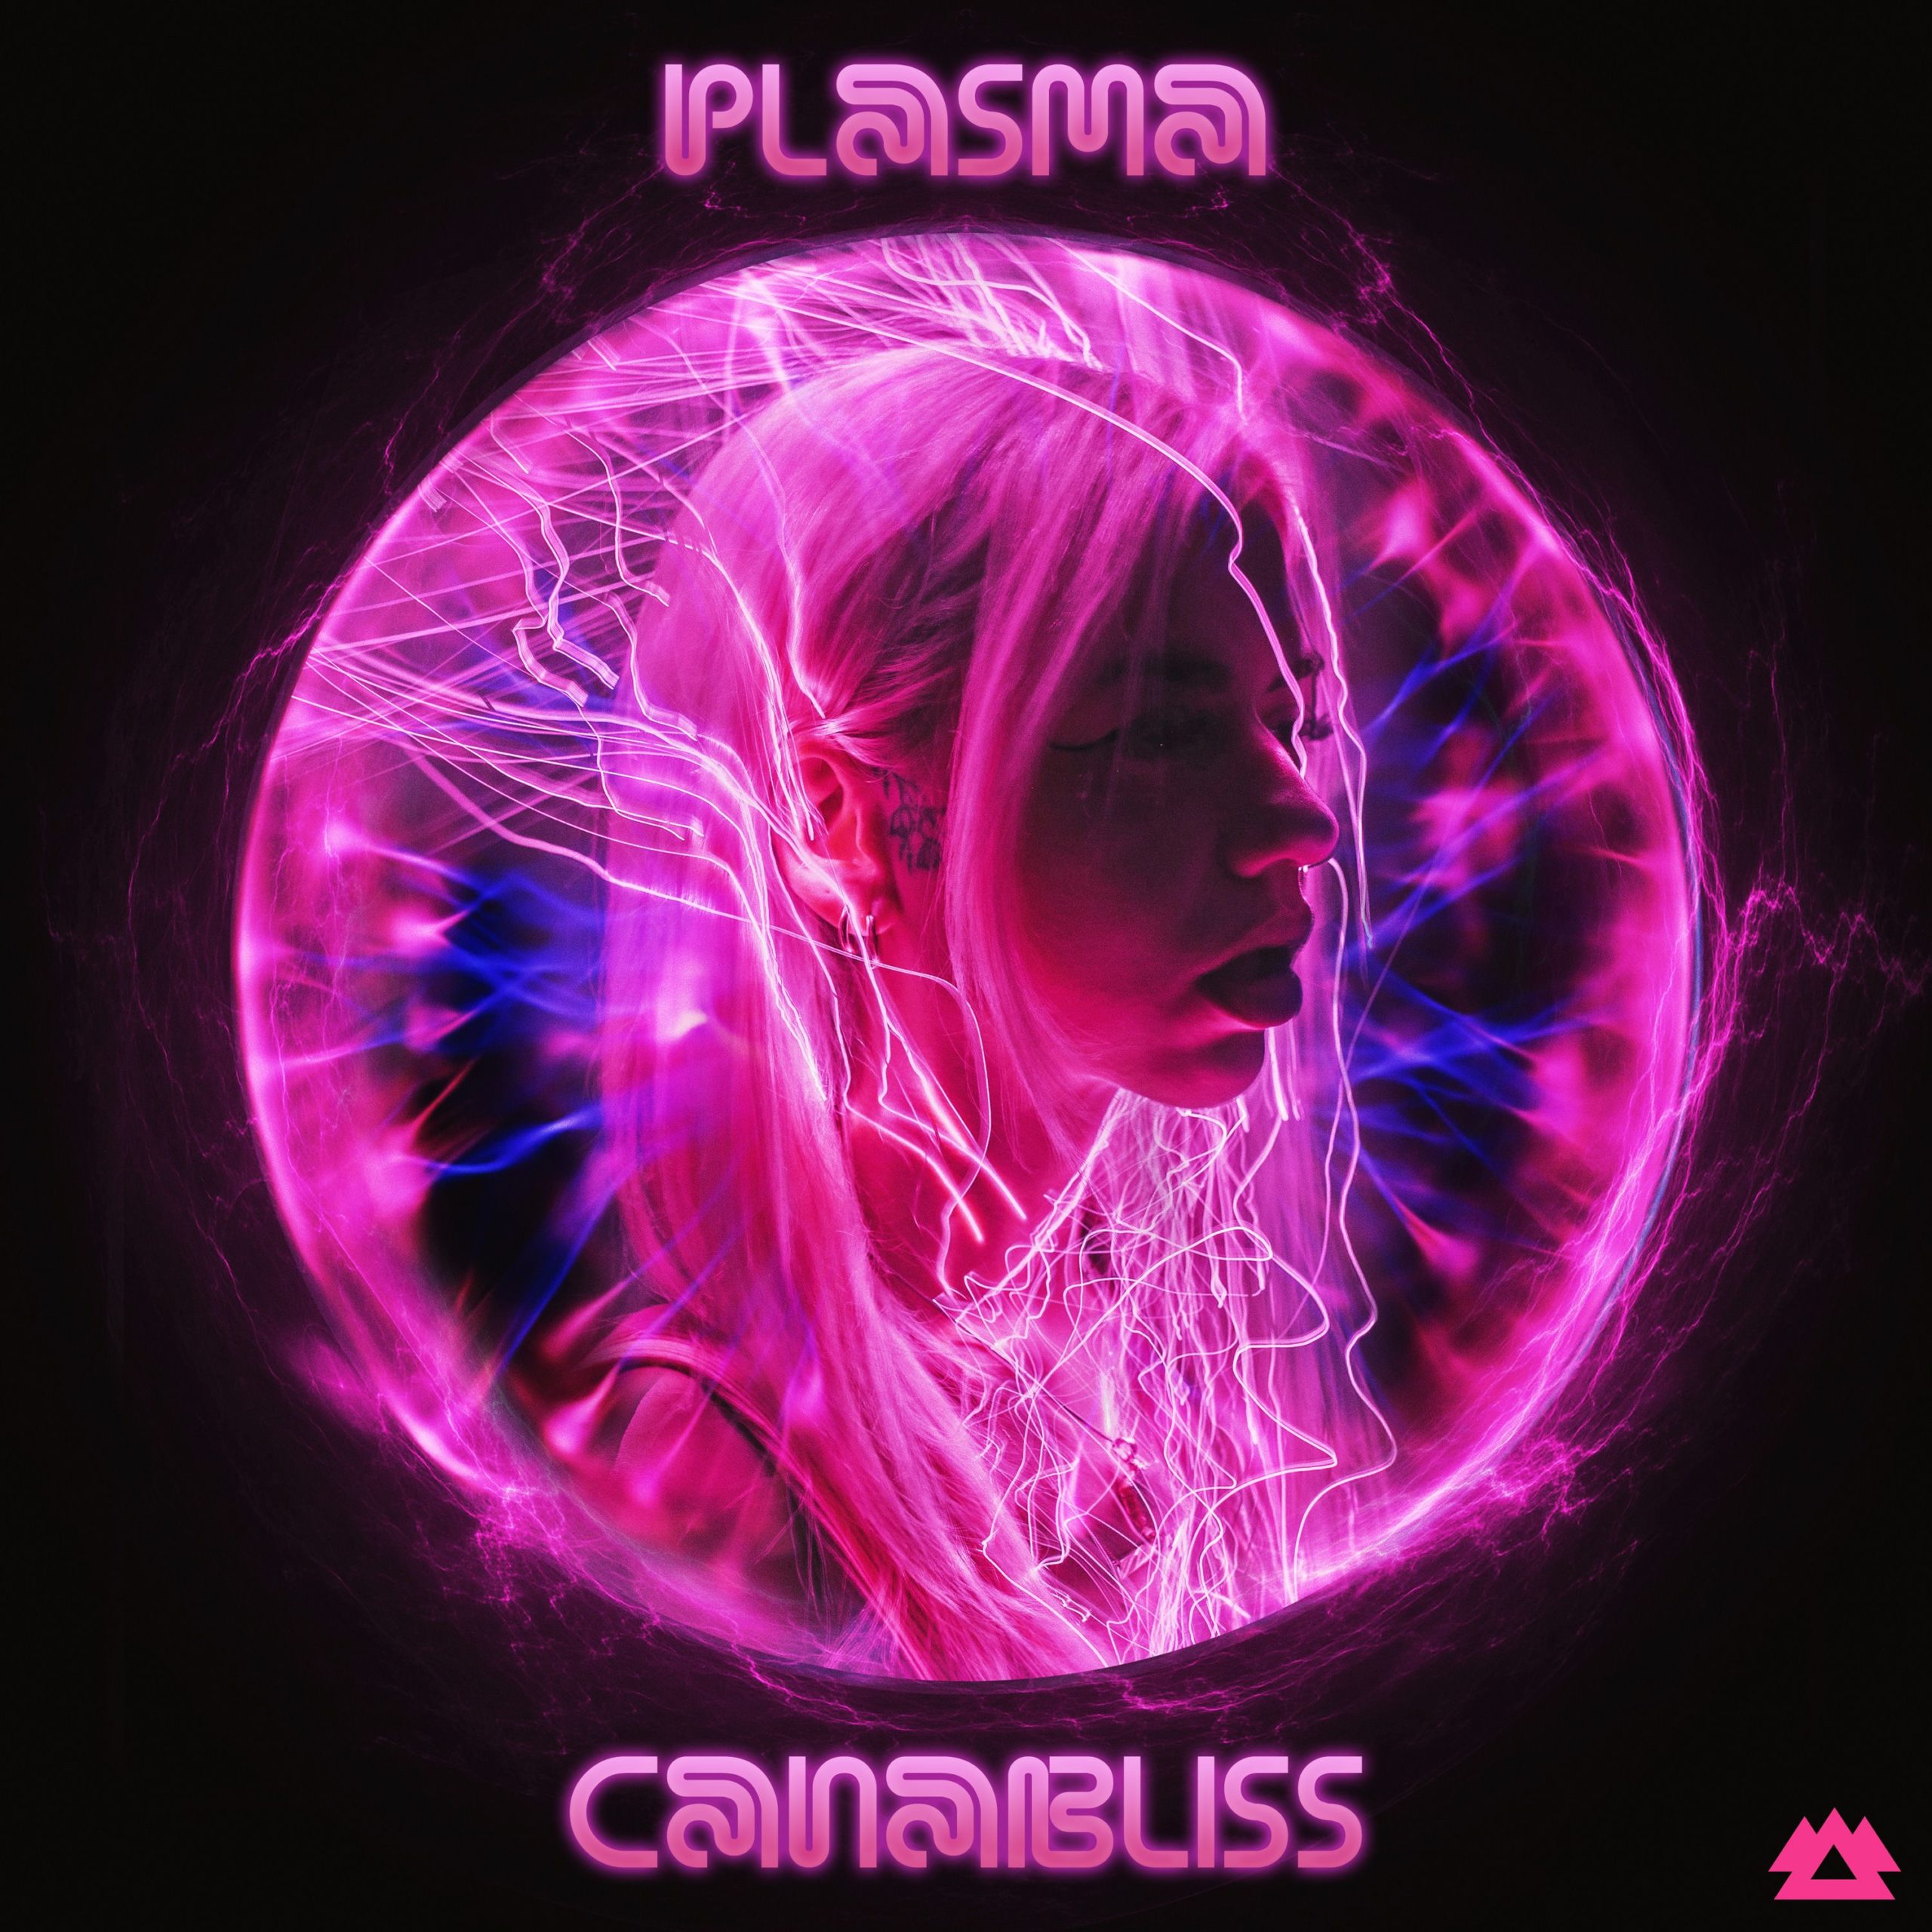 Canabliss Releases Latest EP ‘Plasma’